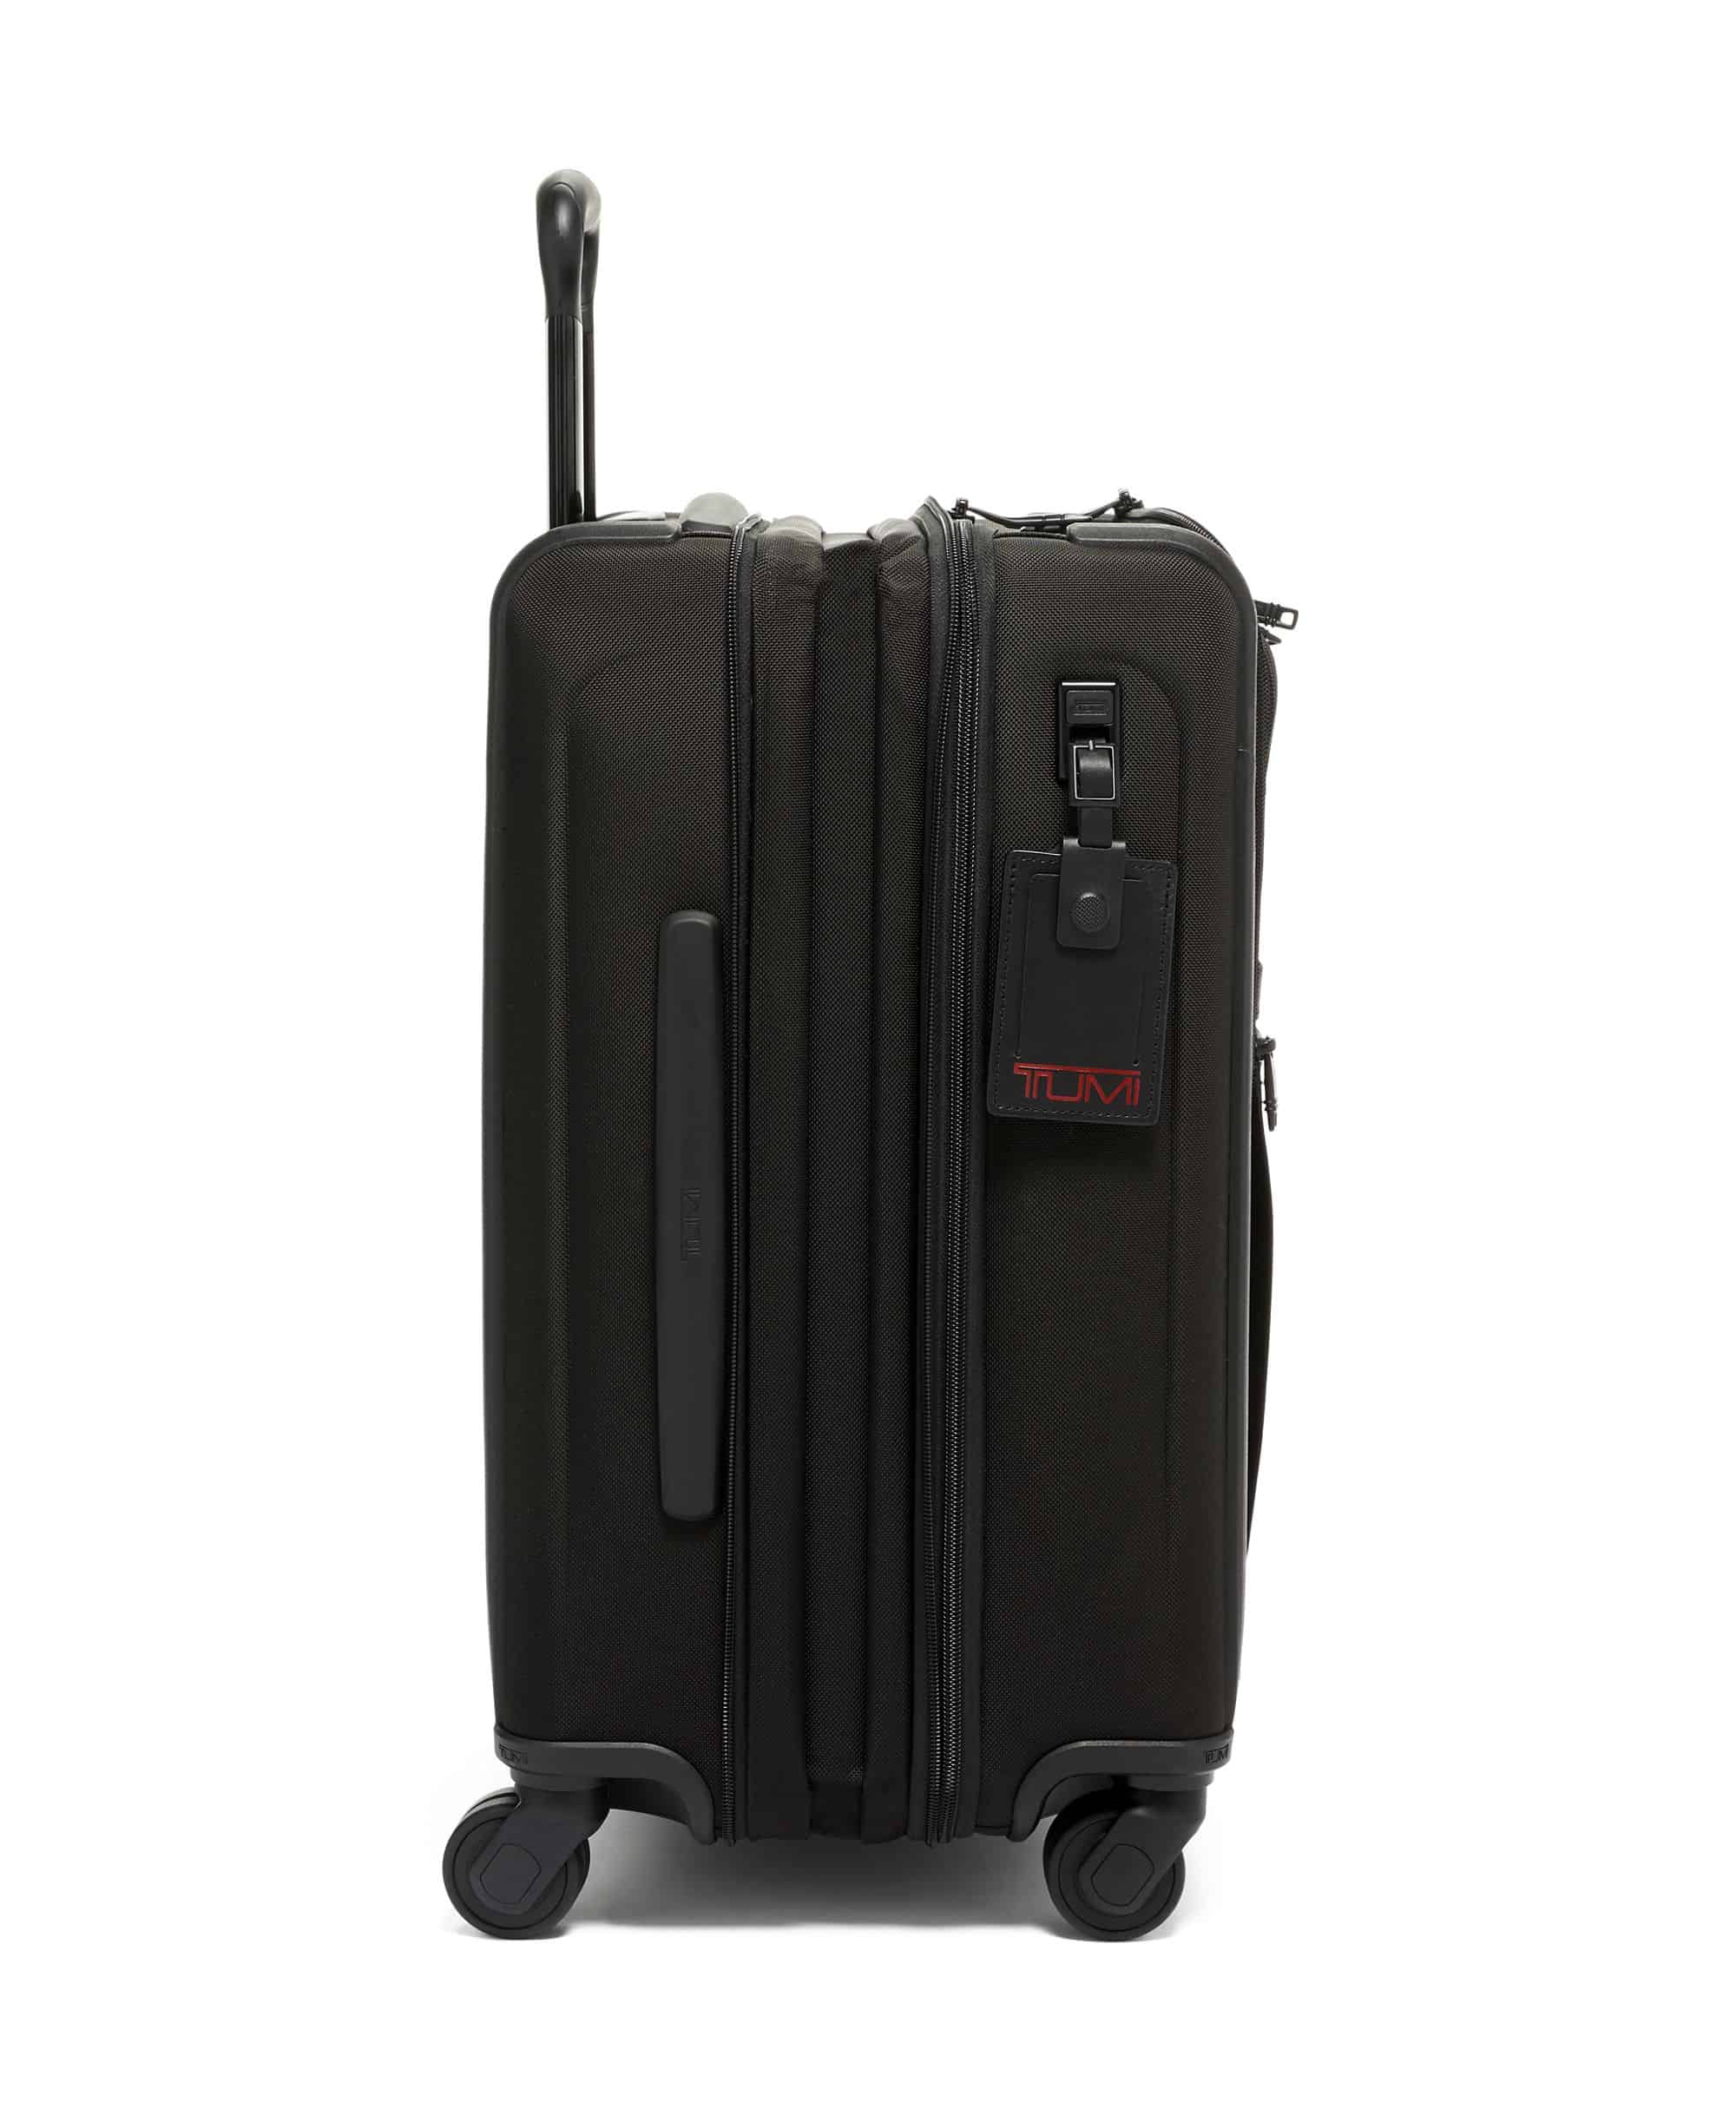 Luxury Suitcases for the Ultimate Journey Experience - Luxury